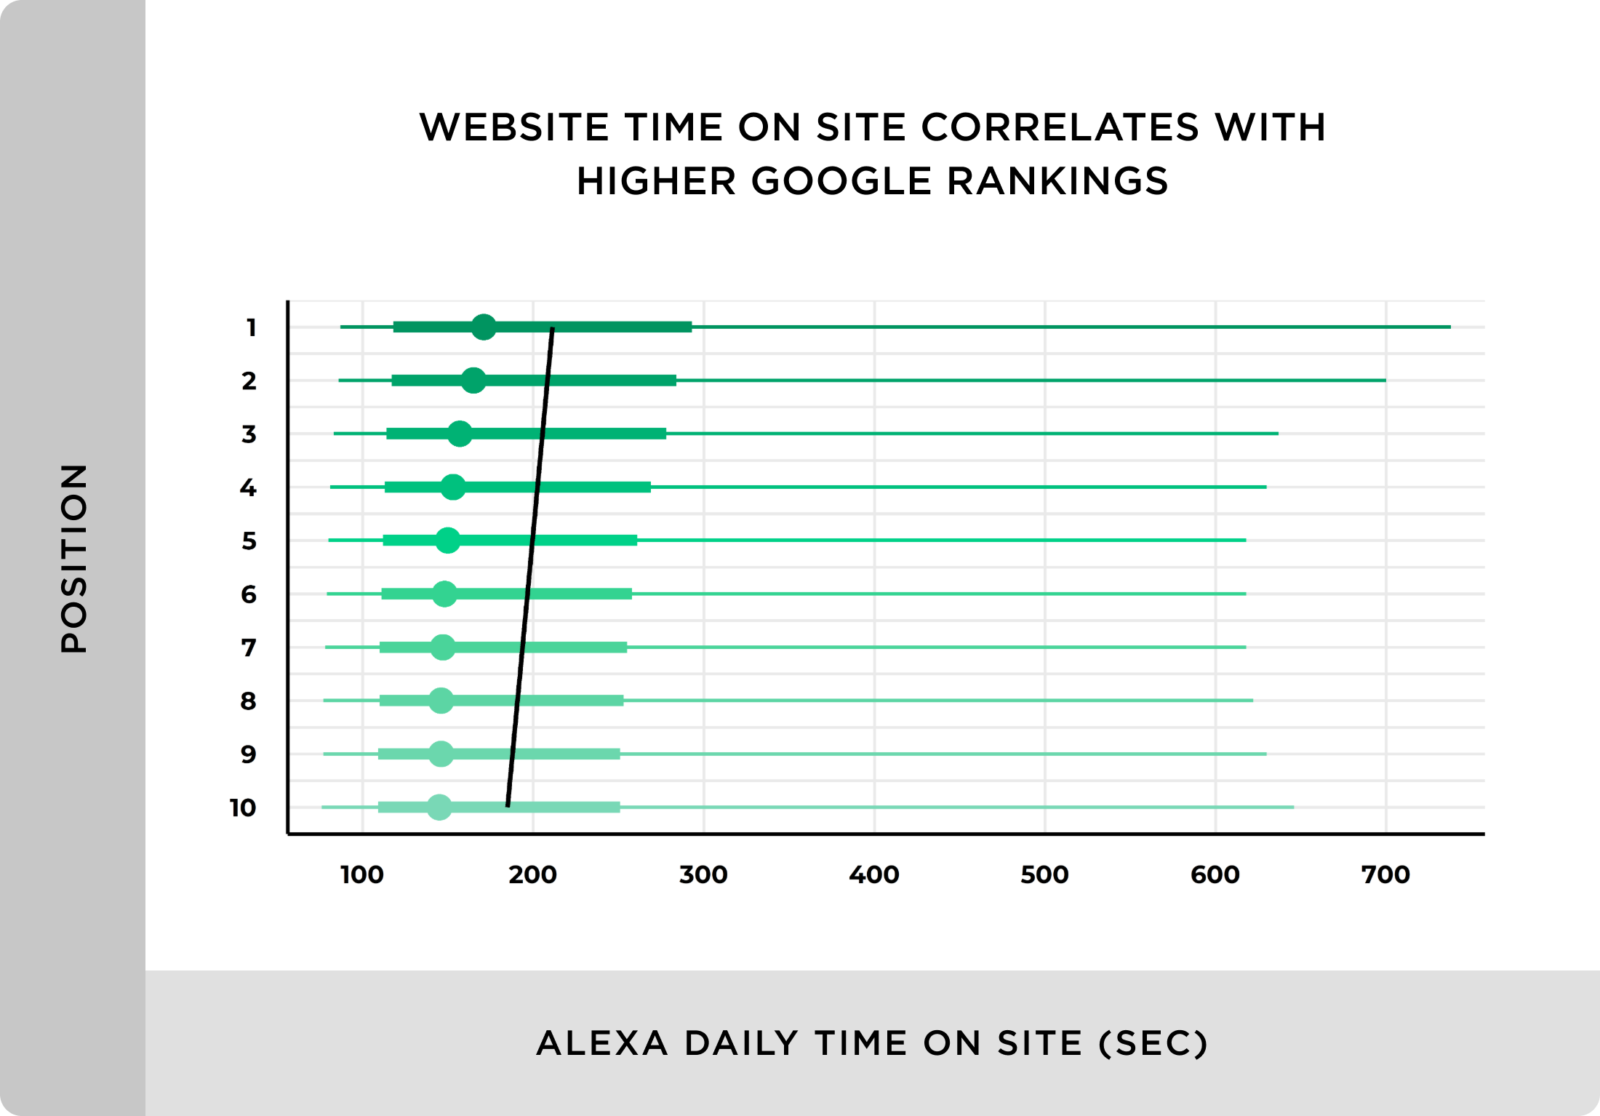 Website time on site correlates with higher Google rankings